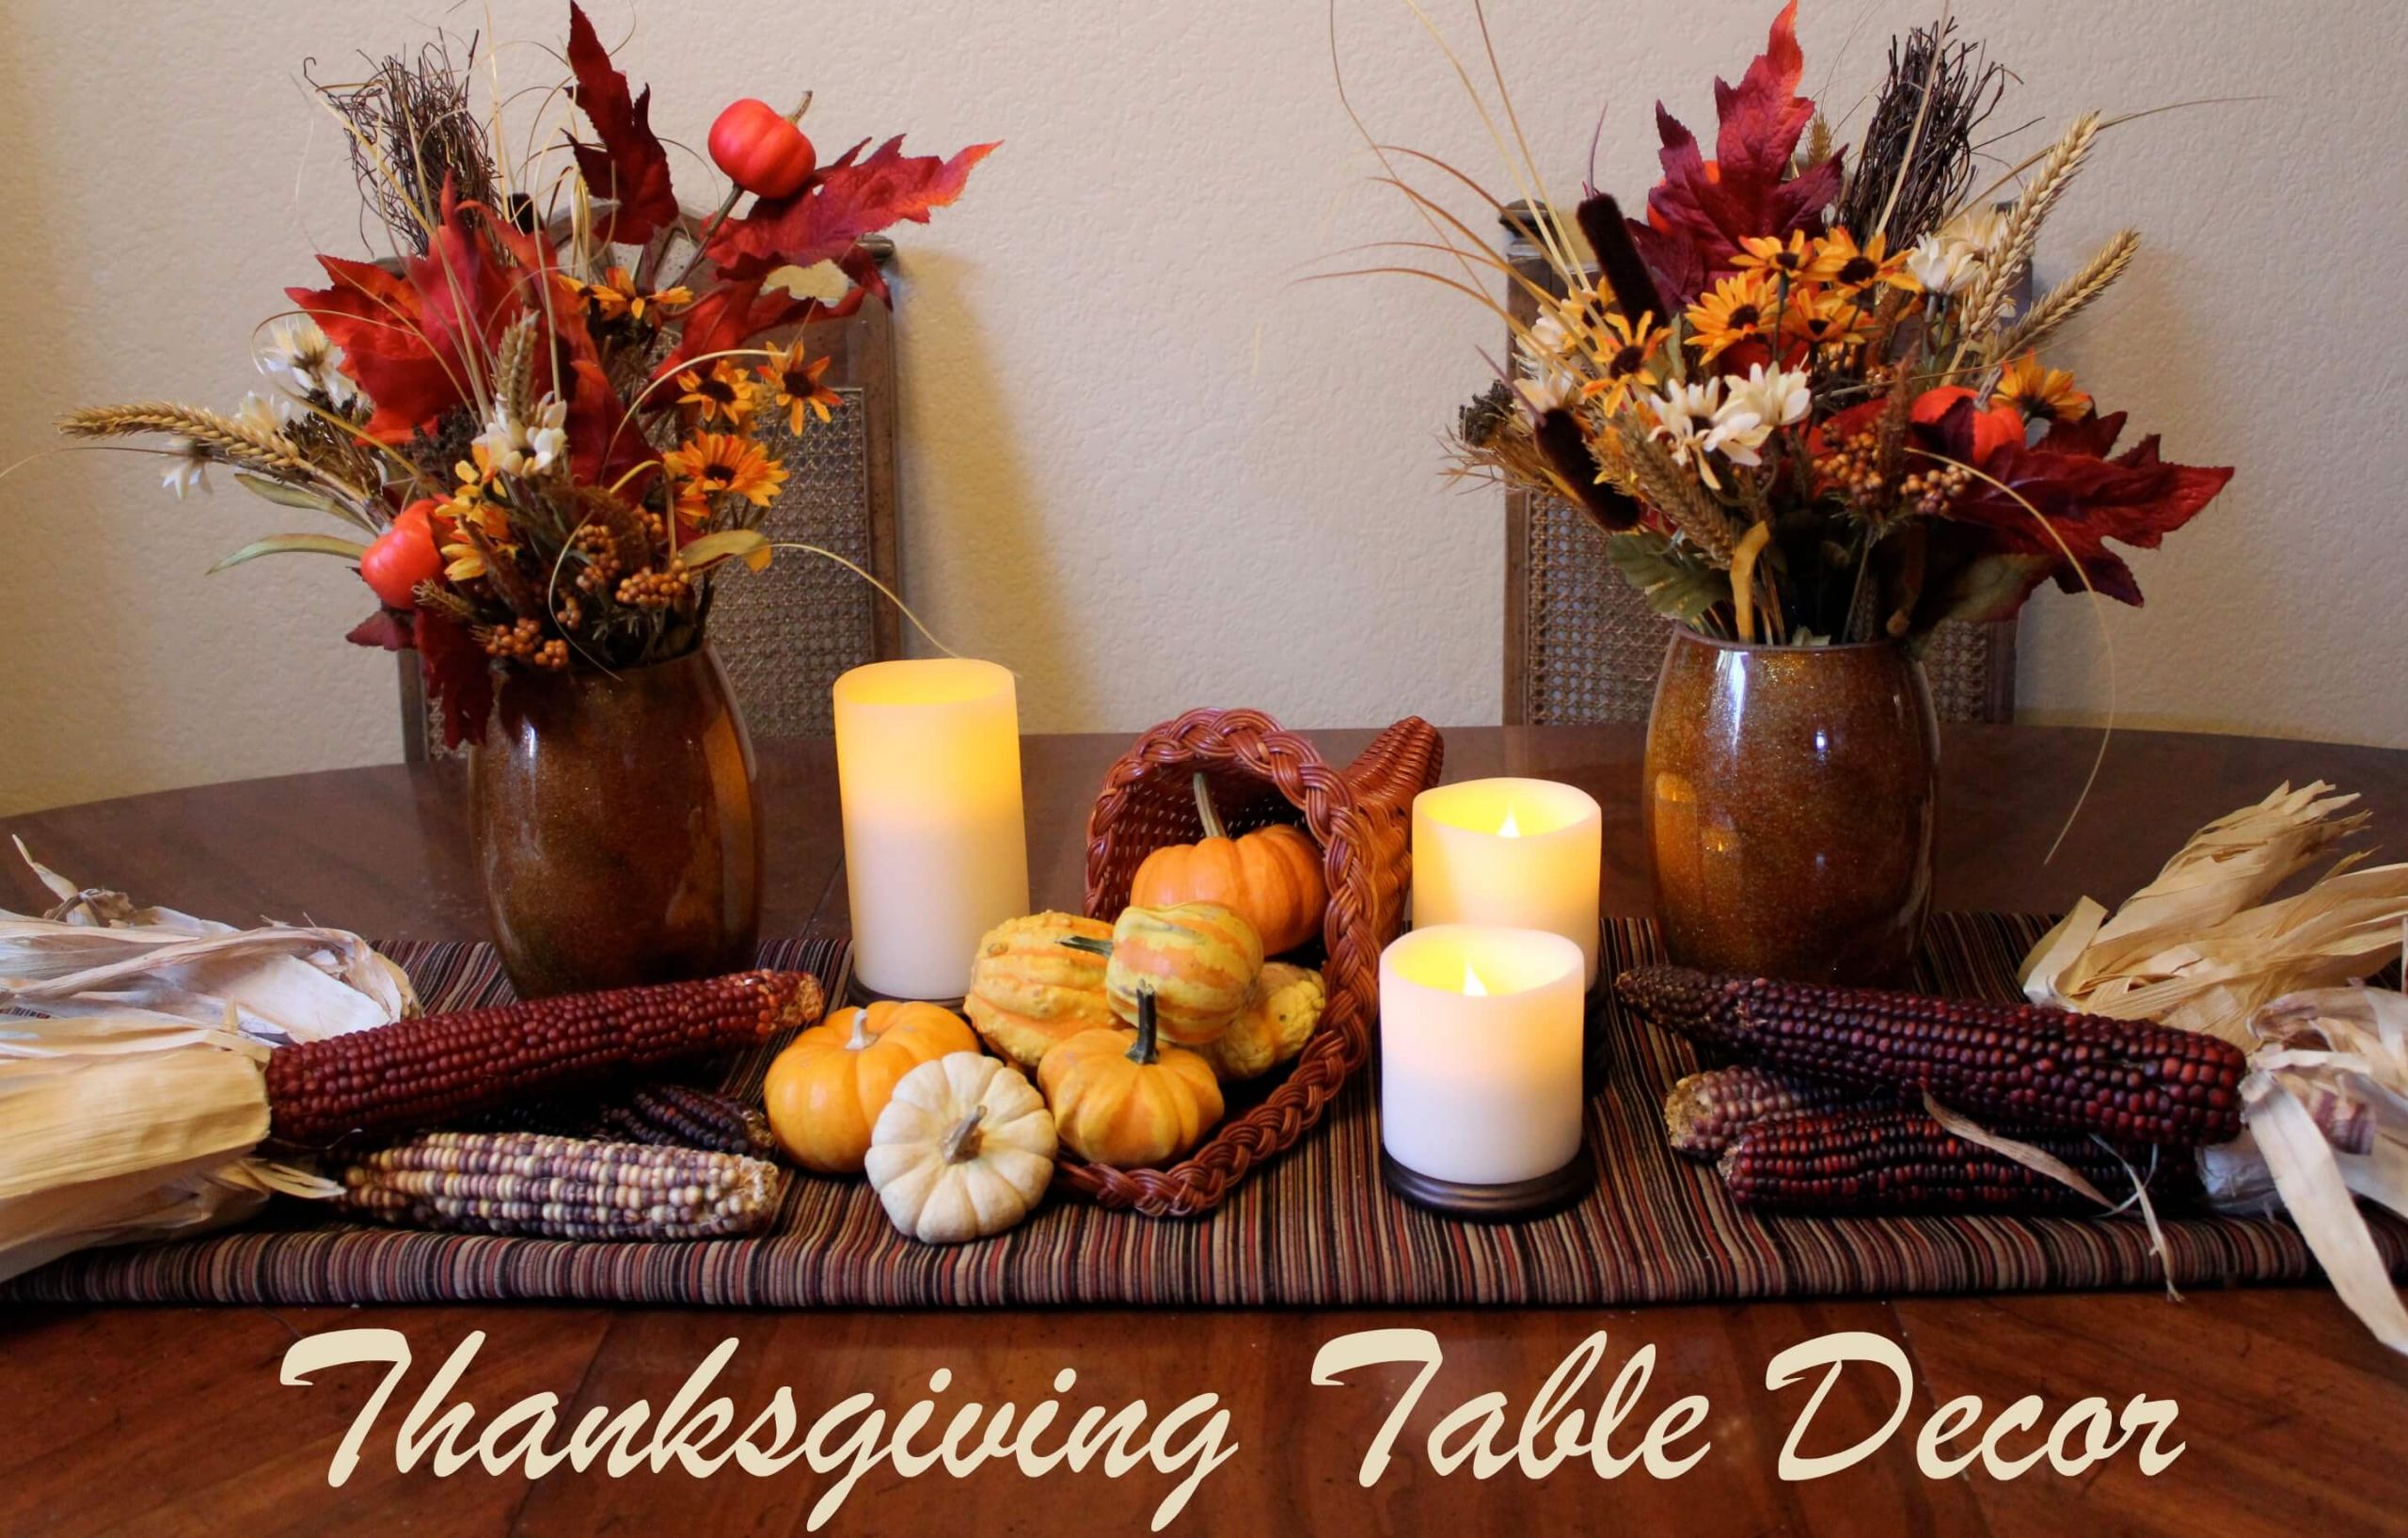 Thanksgiving Video Ideas
 Magnificent DIY Thanksgiving Decorations Ideas You Can Use